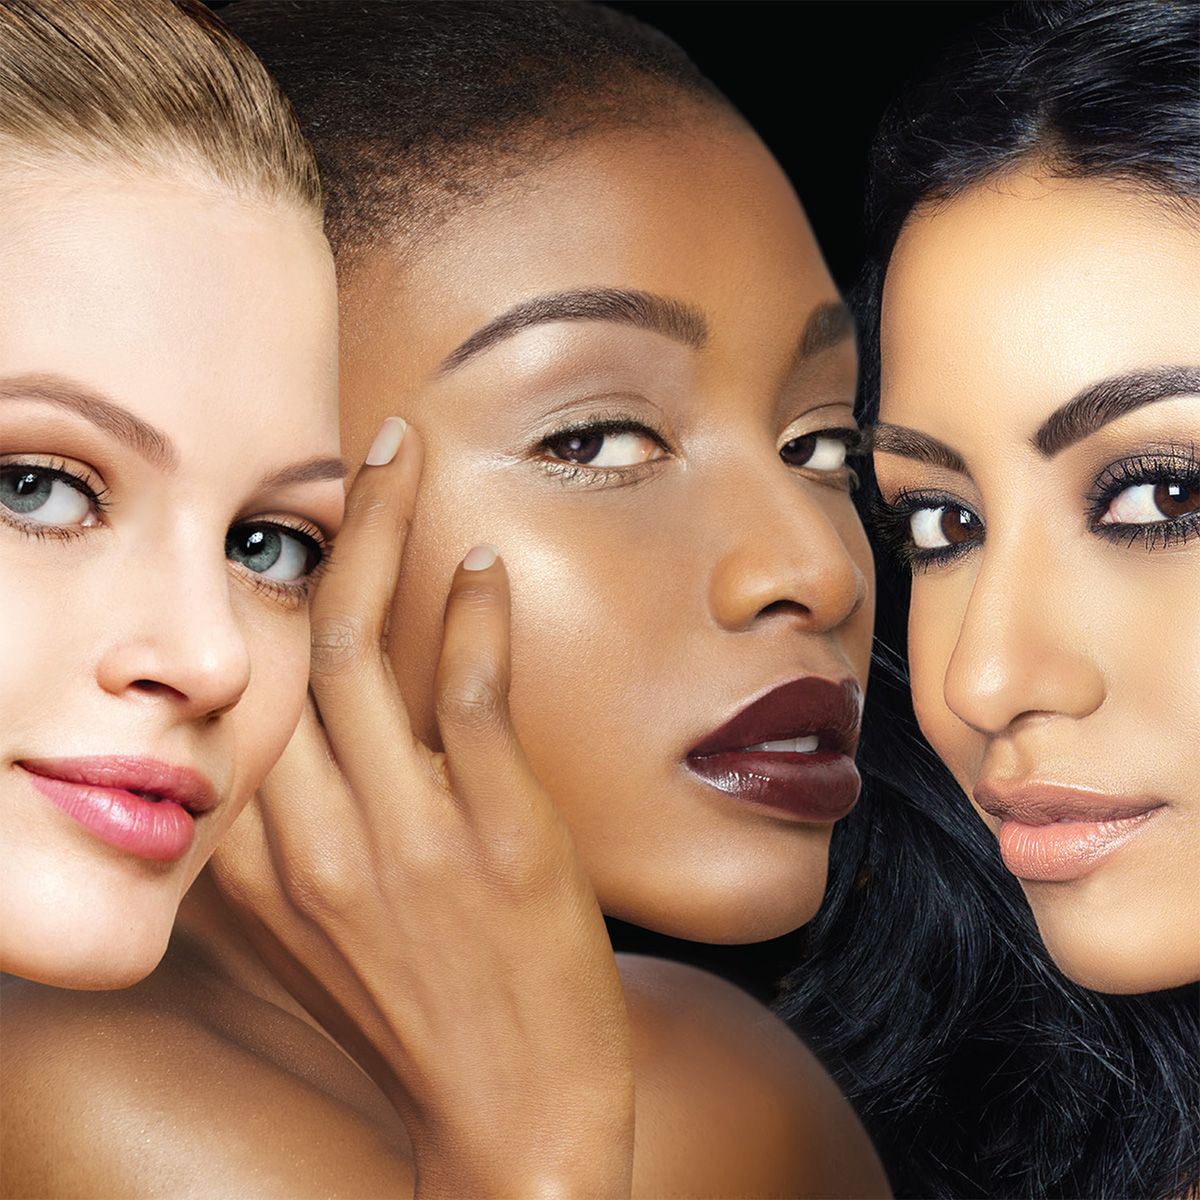 Three women with different skin tones are posing for a picture